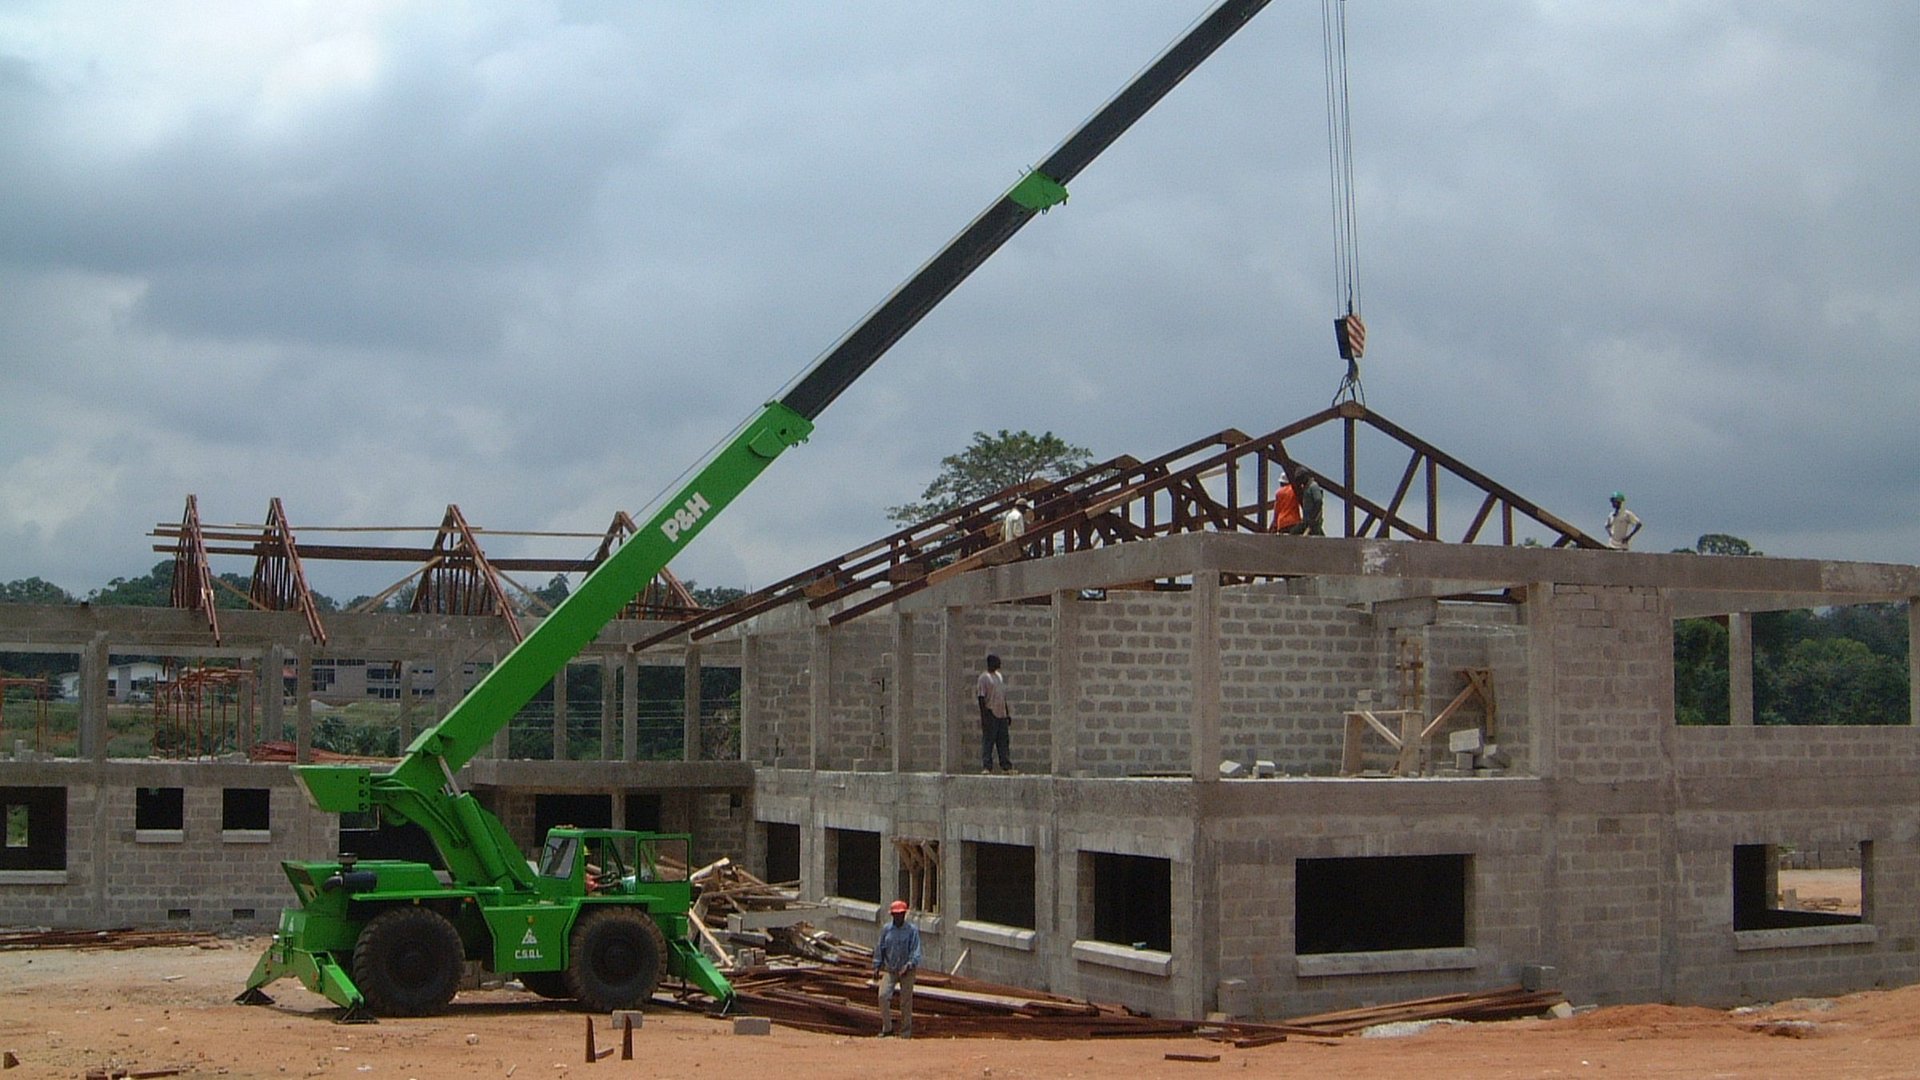 The picture shows a green crane in front of a house under construction with masonry and first roof beams.